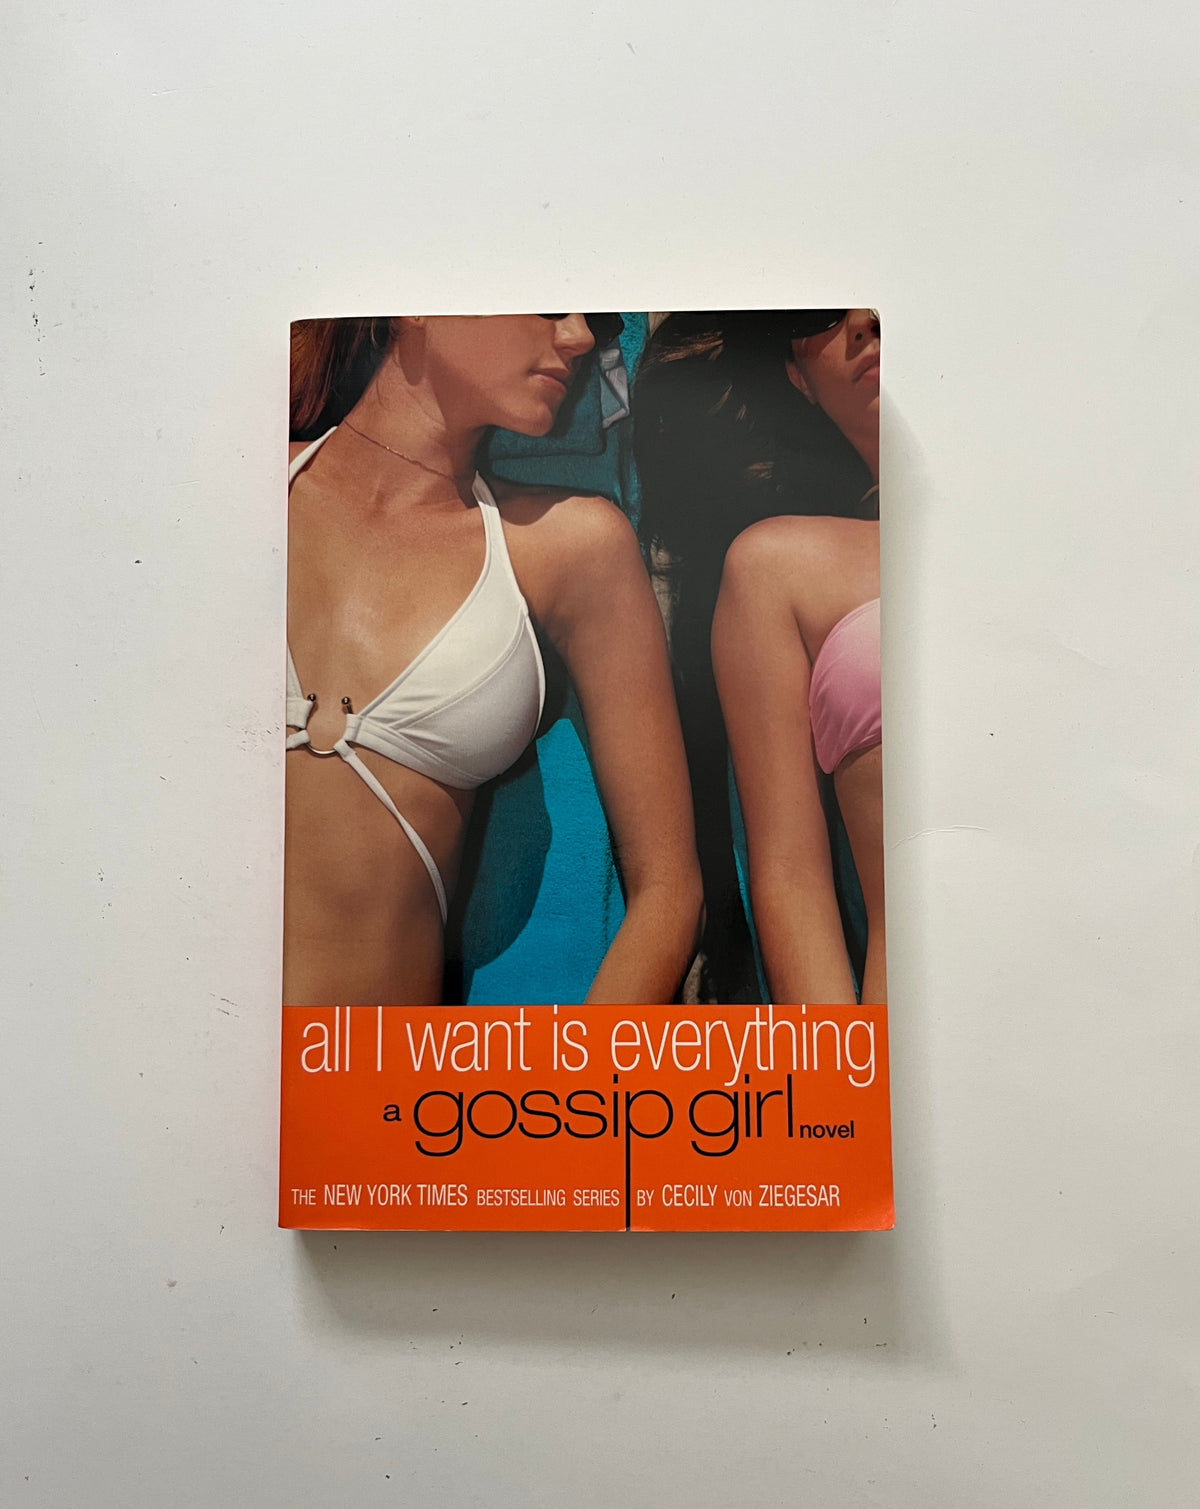 Gossip Girl: All I Want is Everything by Cecily von Ziegesar